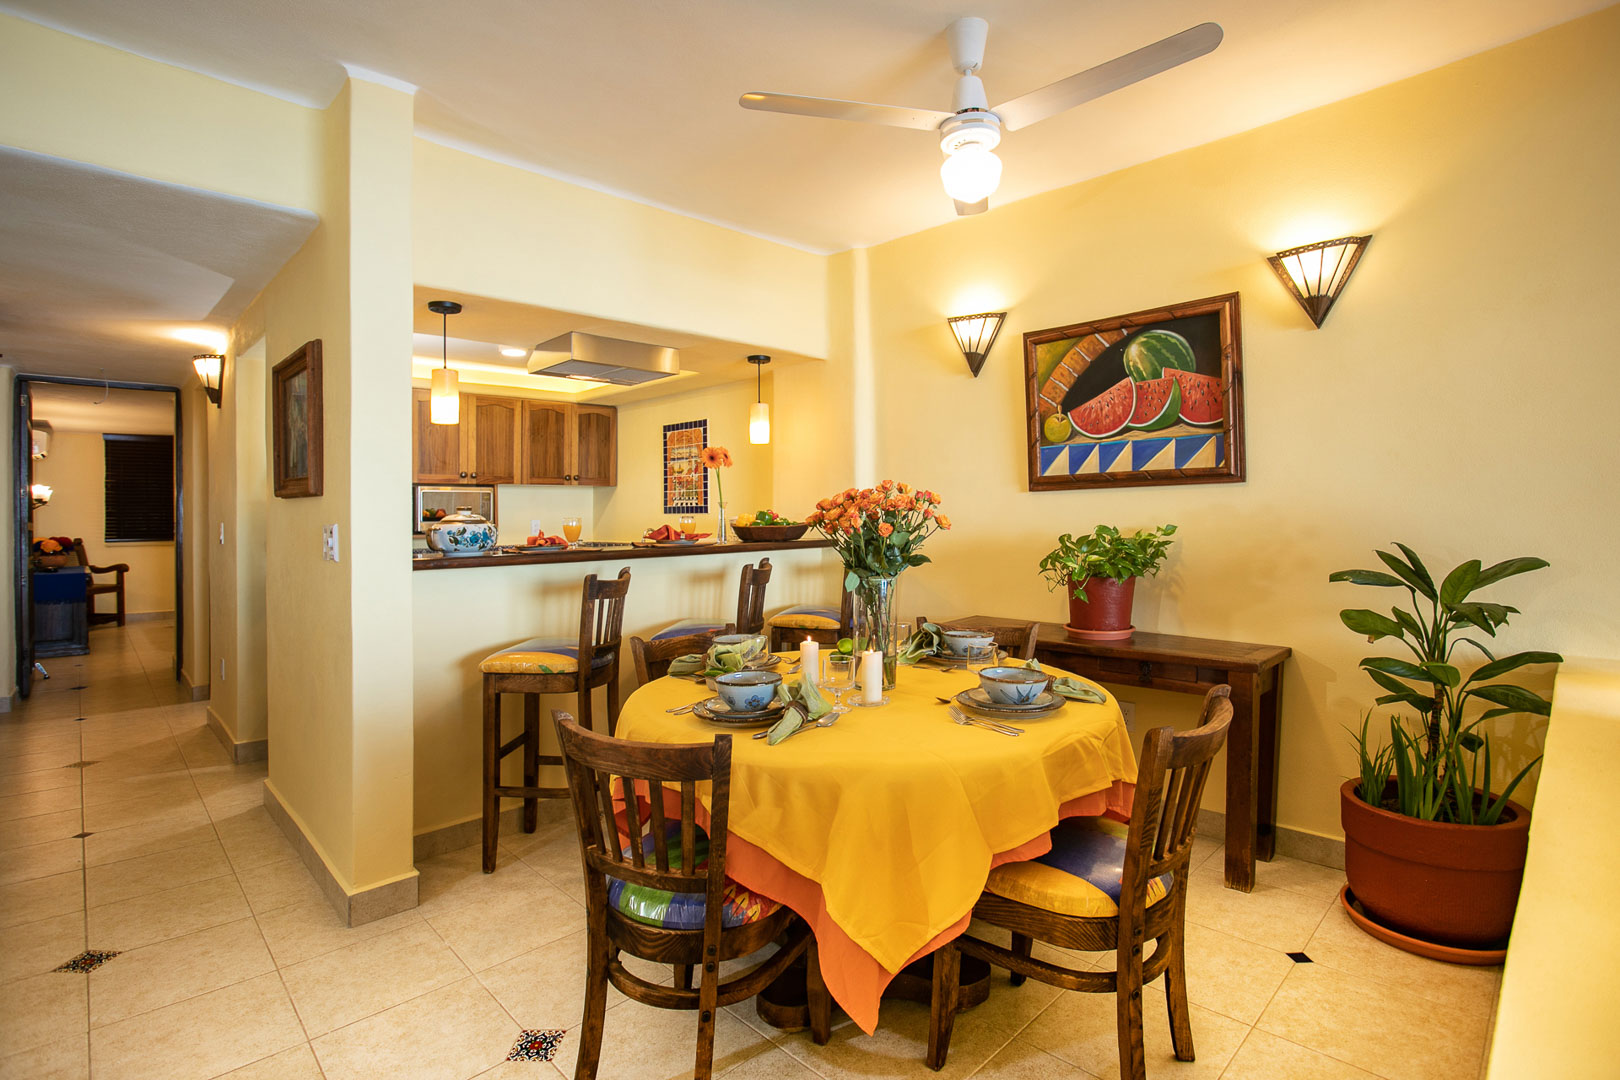 A colorful dining area at TPI's Lindo Mar Resort in Puerto Vallarta, Mexico.